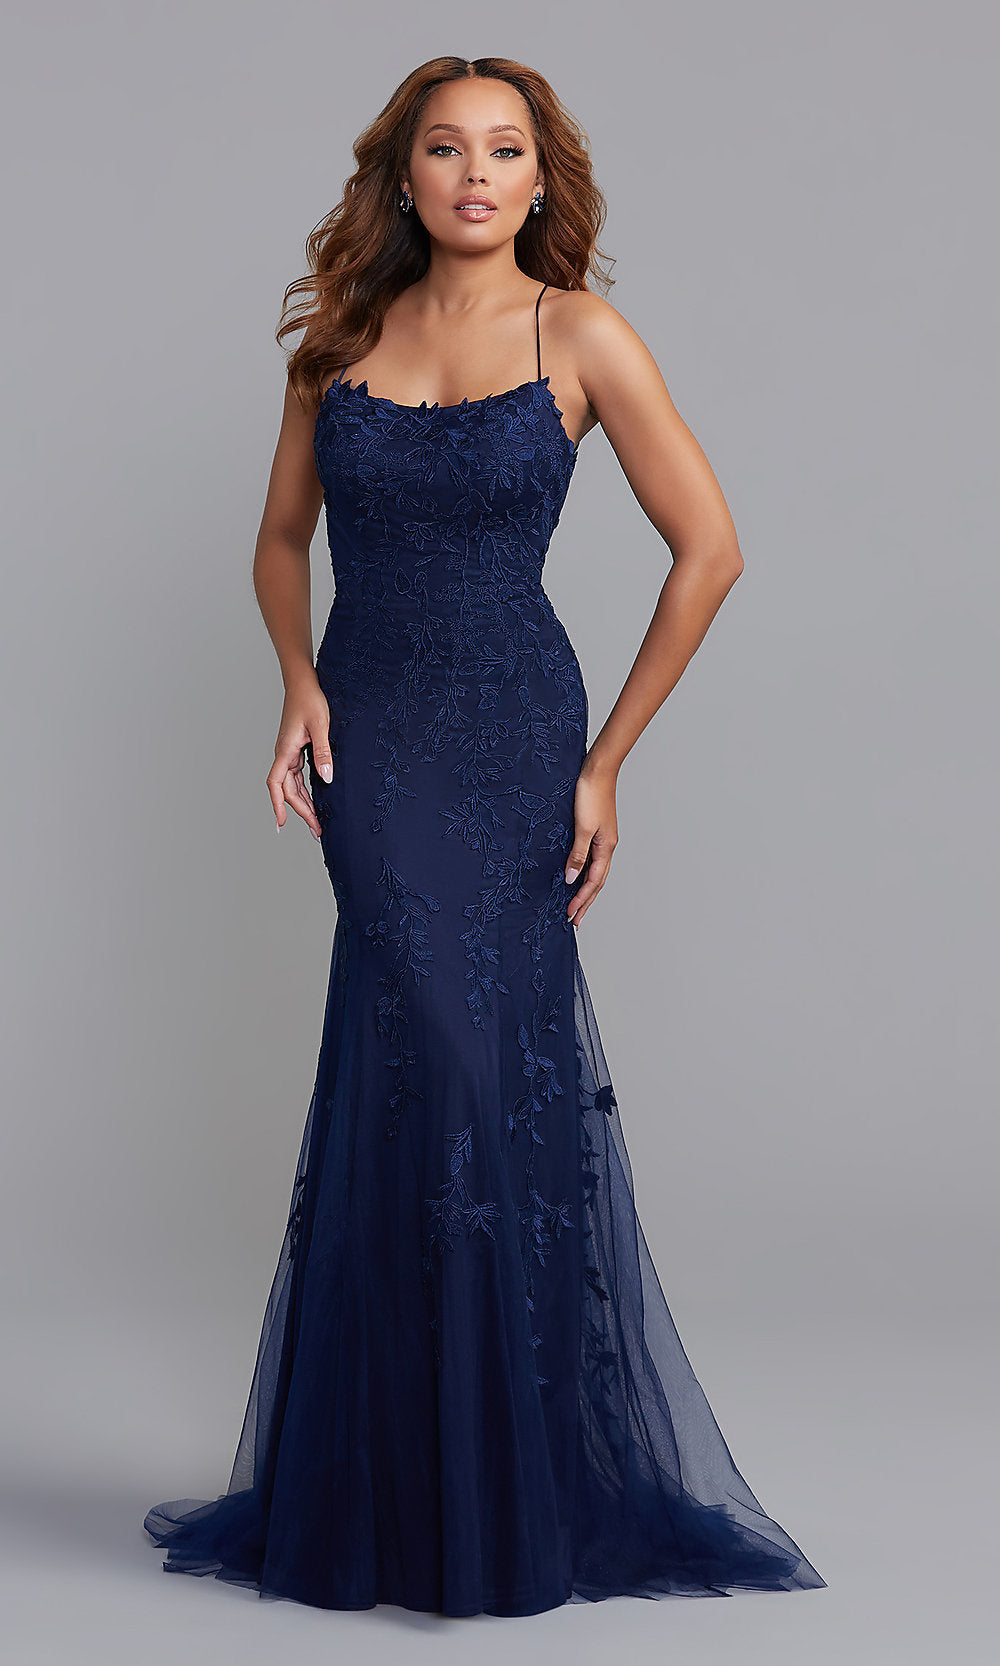 Eclipse Backless Long Blue Formal Prom Gown with Beading